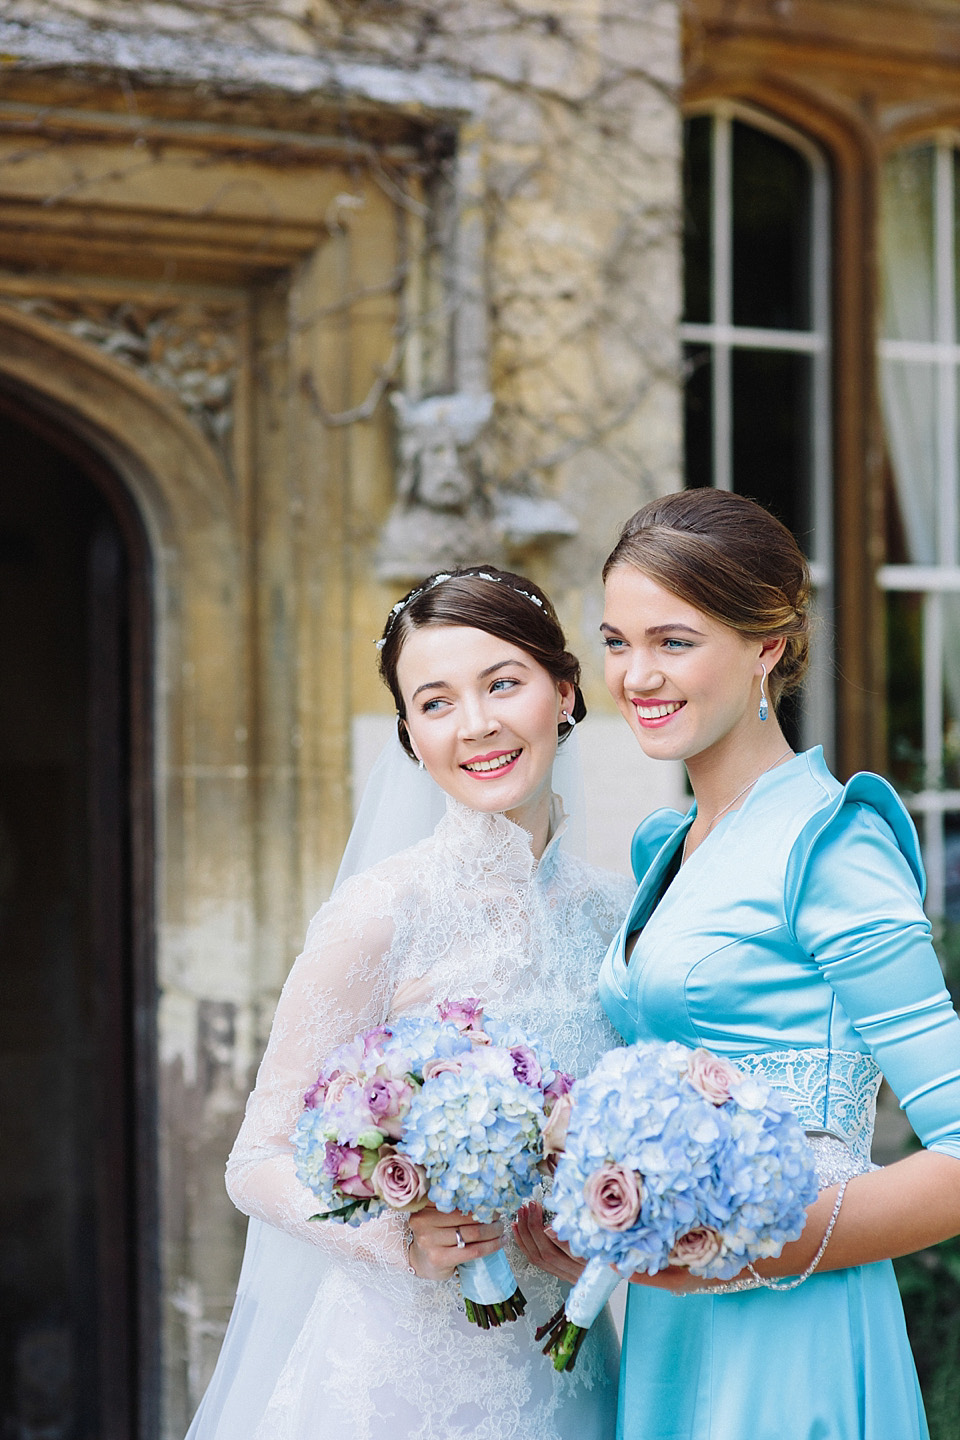 Grace Kelly Elegance and a Manuel Mota Gown for a Fairytale Wedding at Blenheim Palace